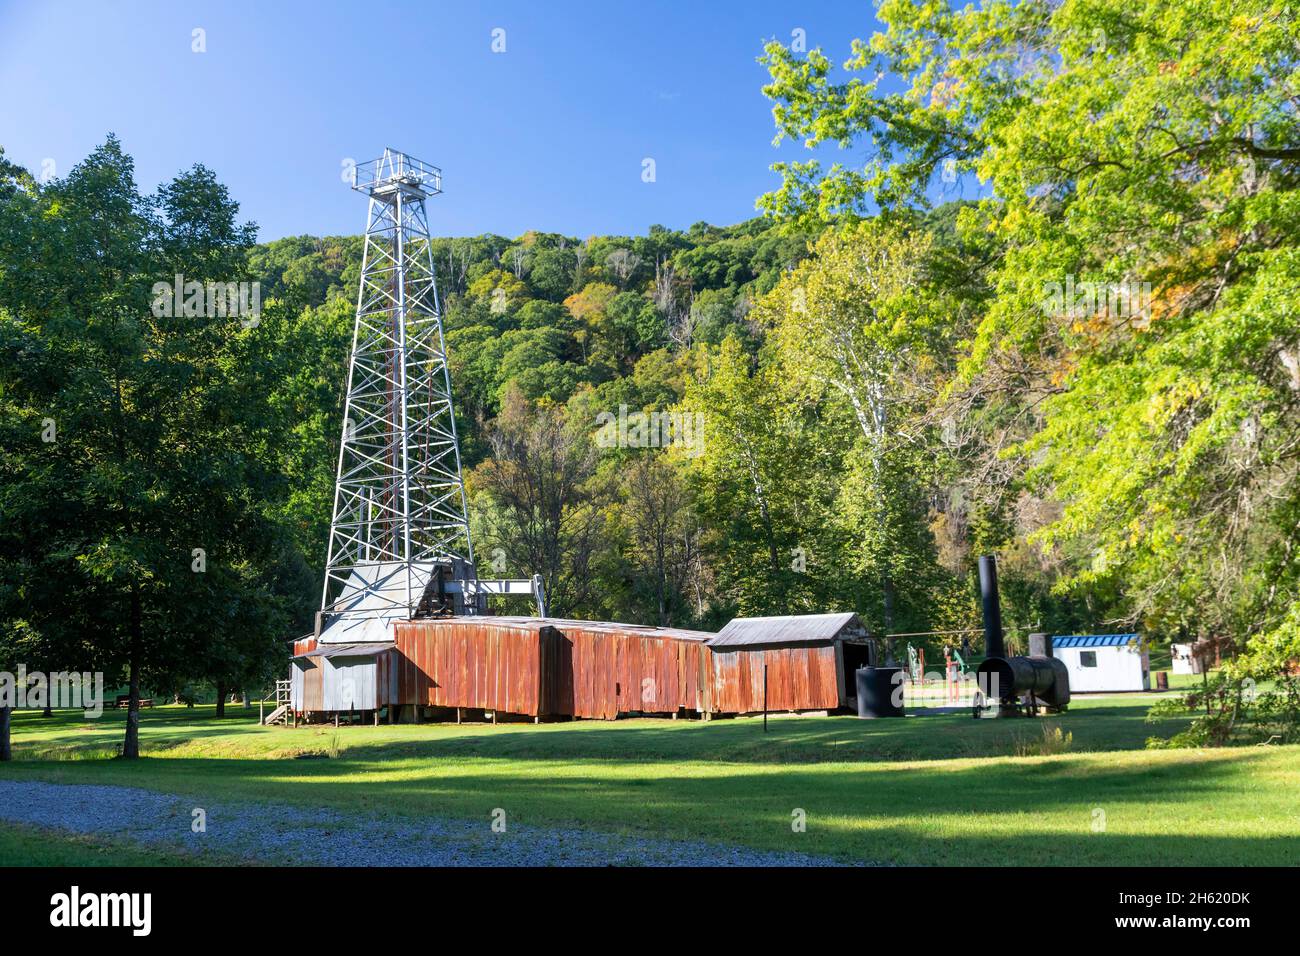 Titusville, Pennsylvania - The Drake Well Museum and Park, where in 1859 Edwin Drake drilled a successful oil well and launched the modern oil industr Stock Photo